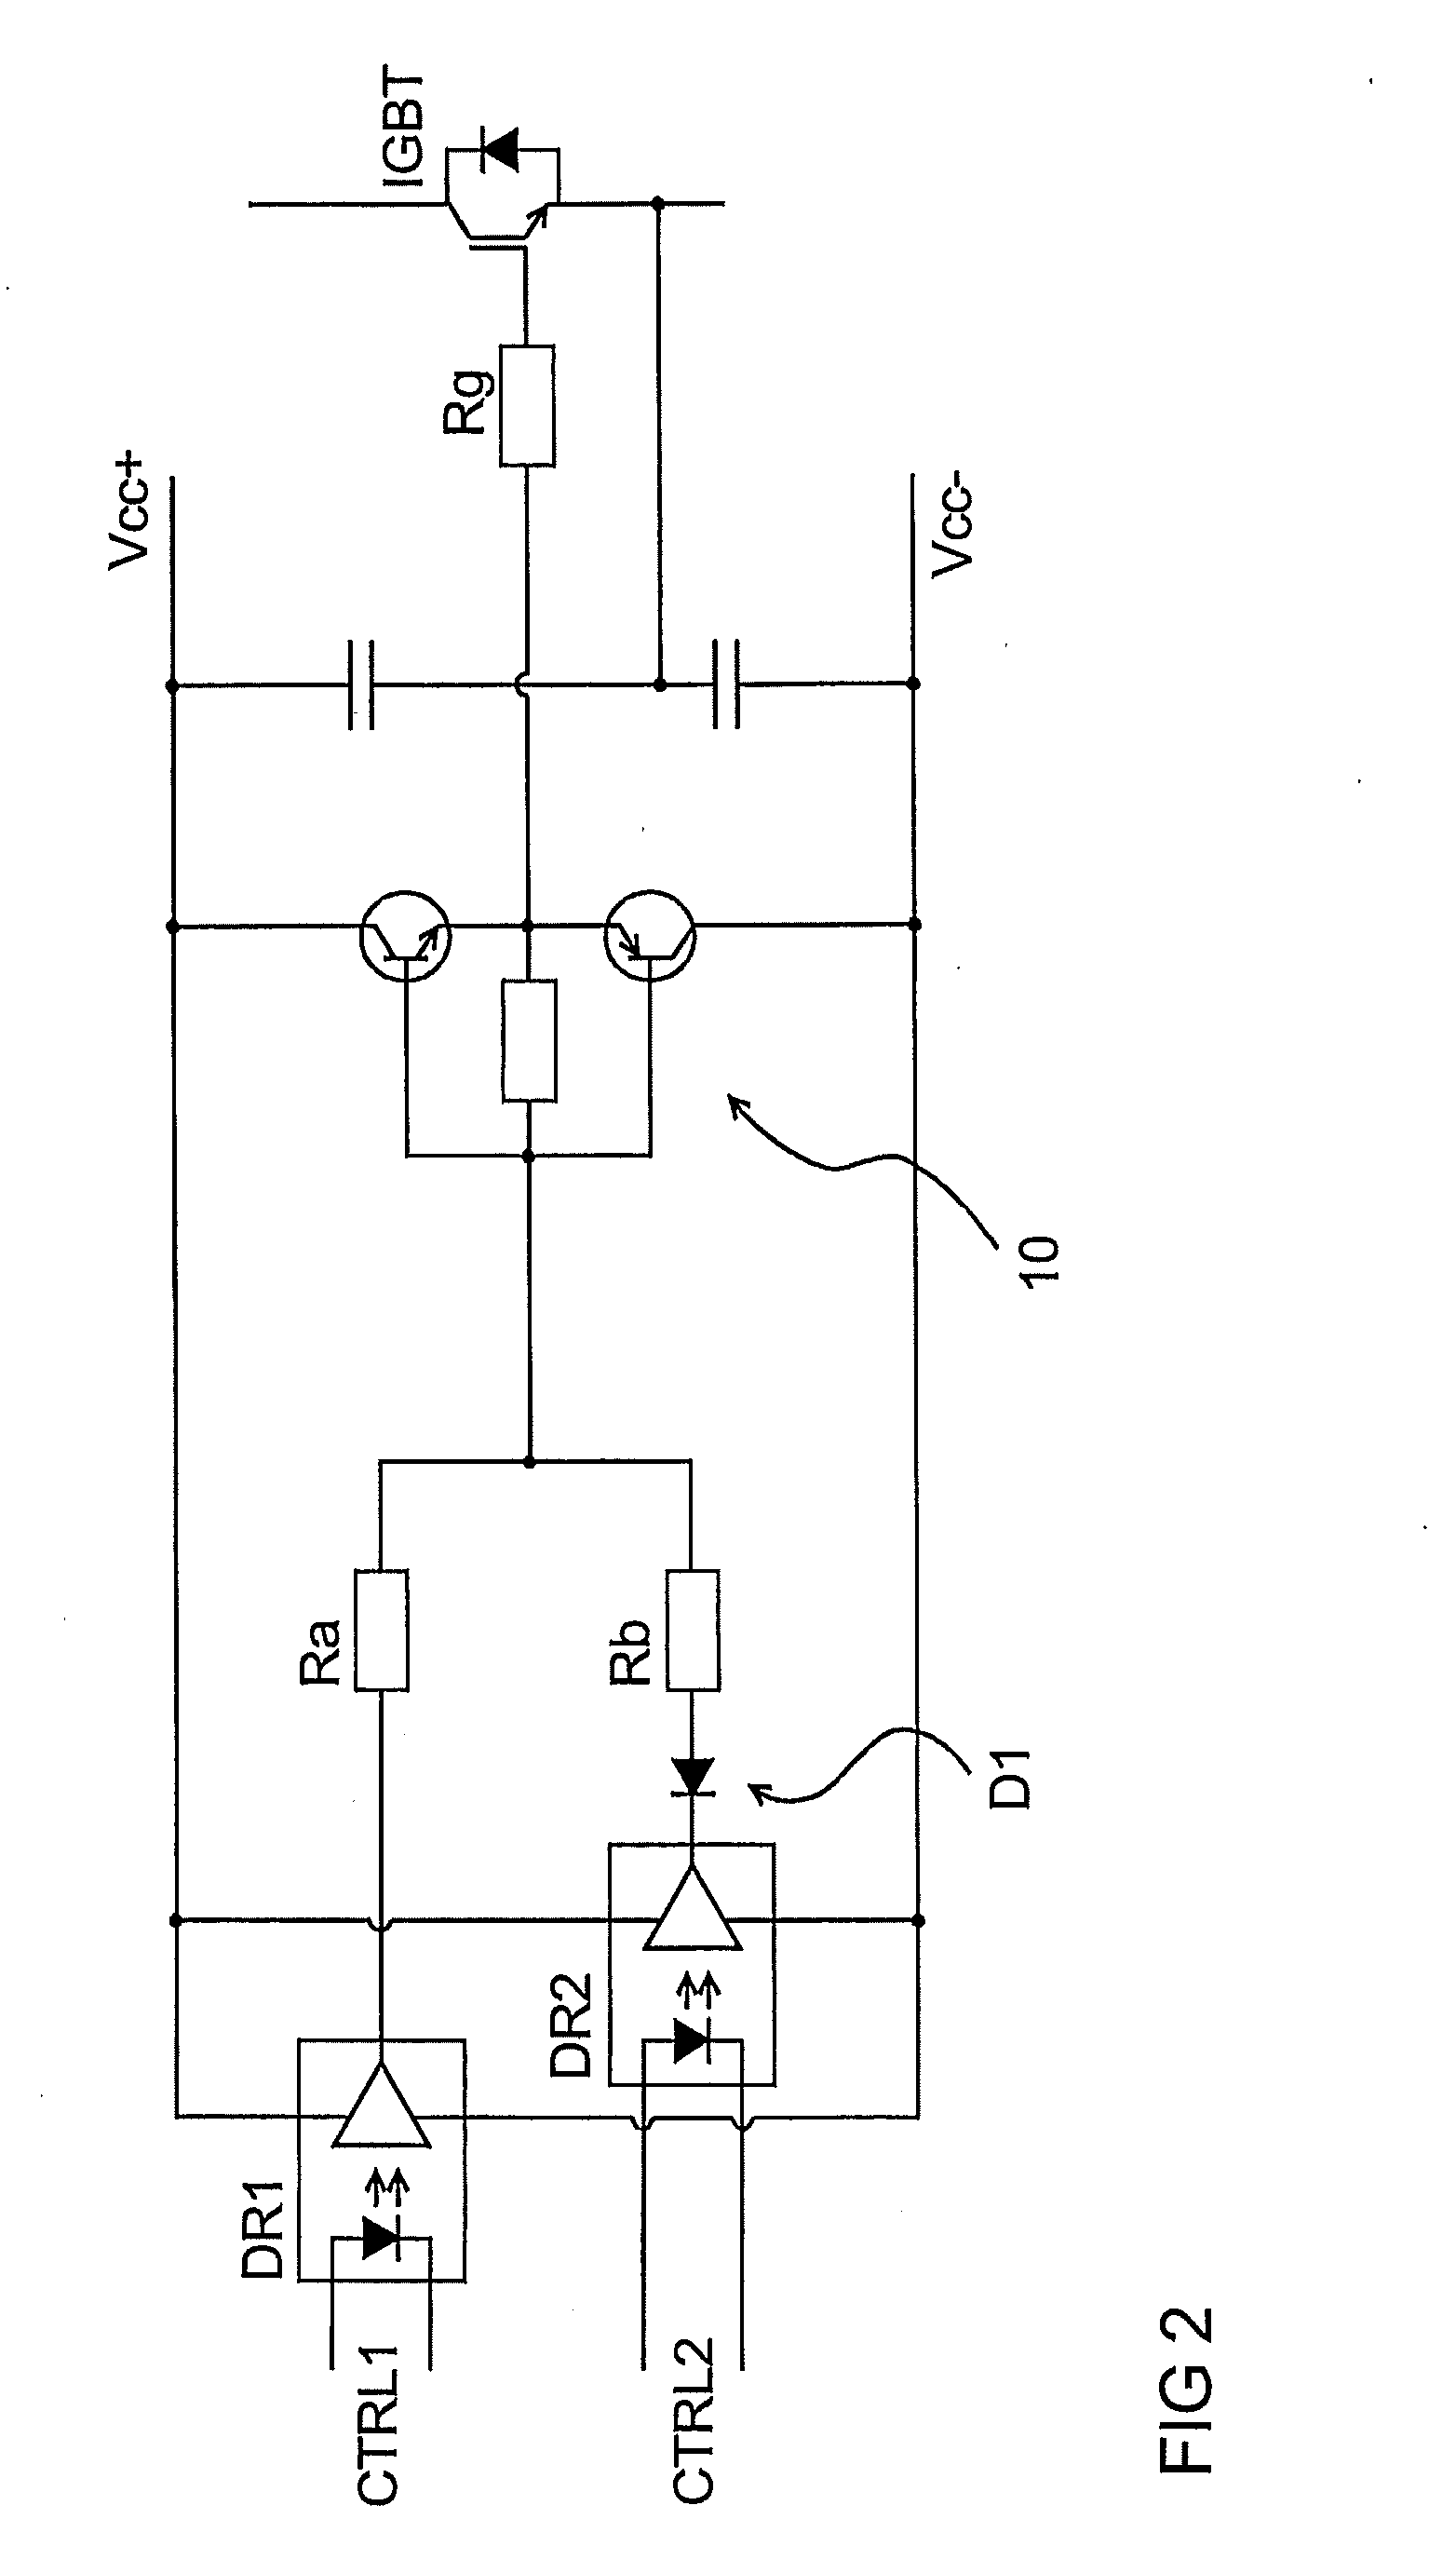 Method of controlling an IGBT and a gate driver